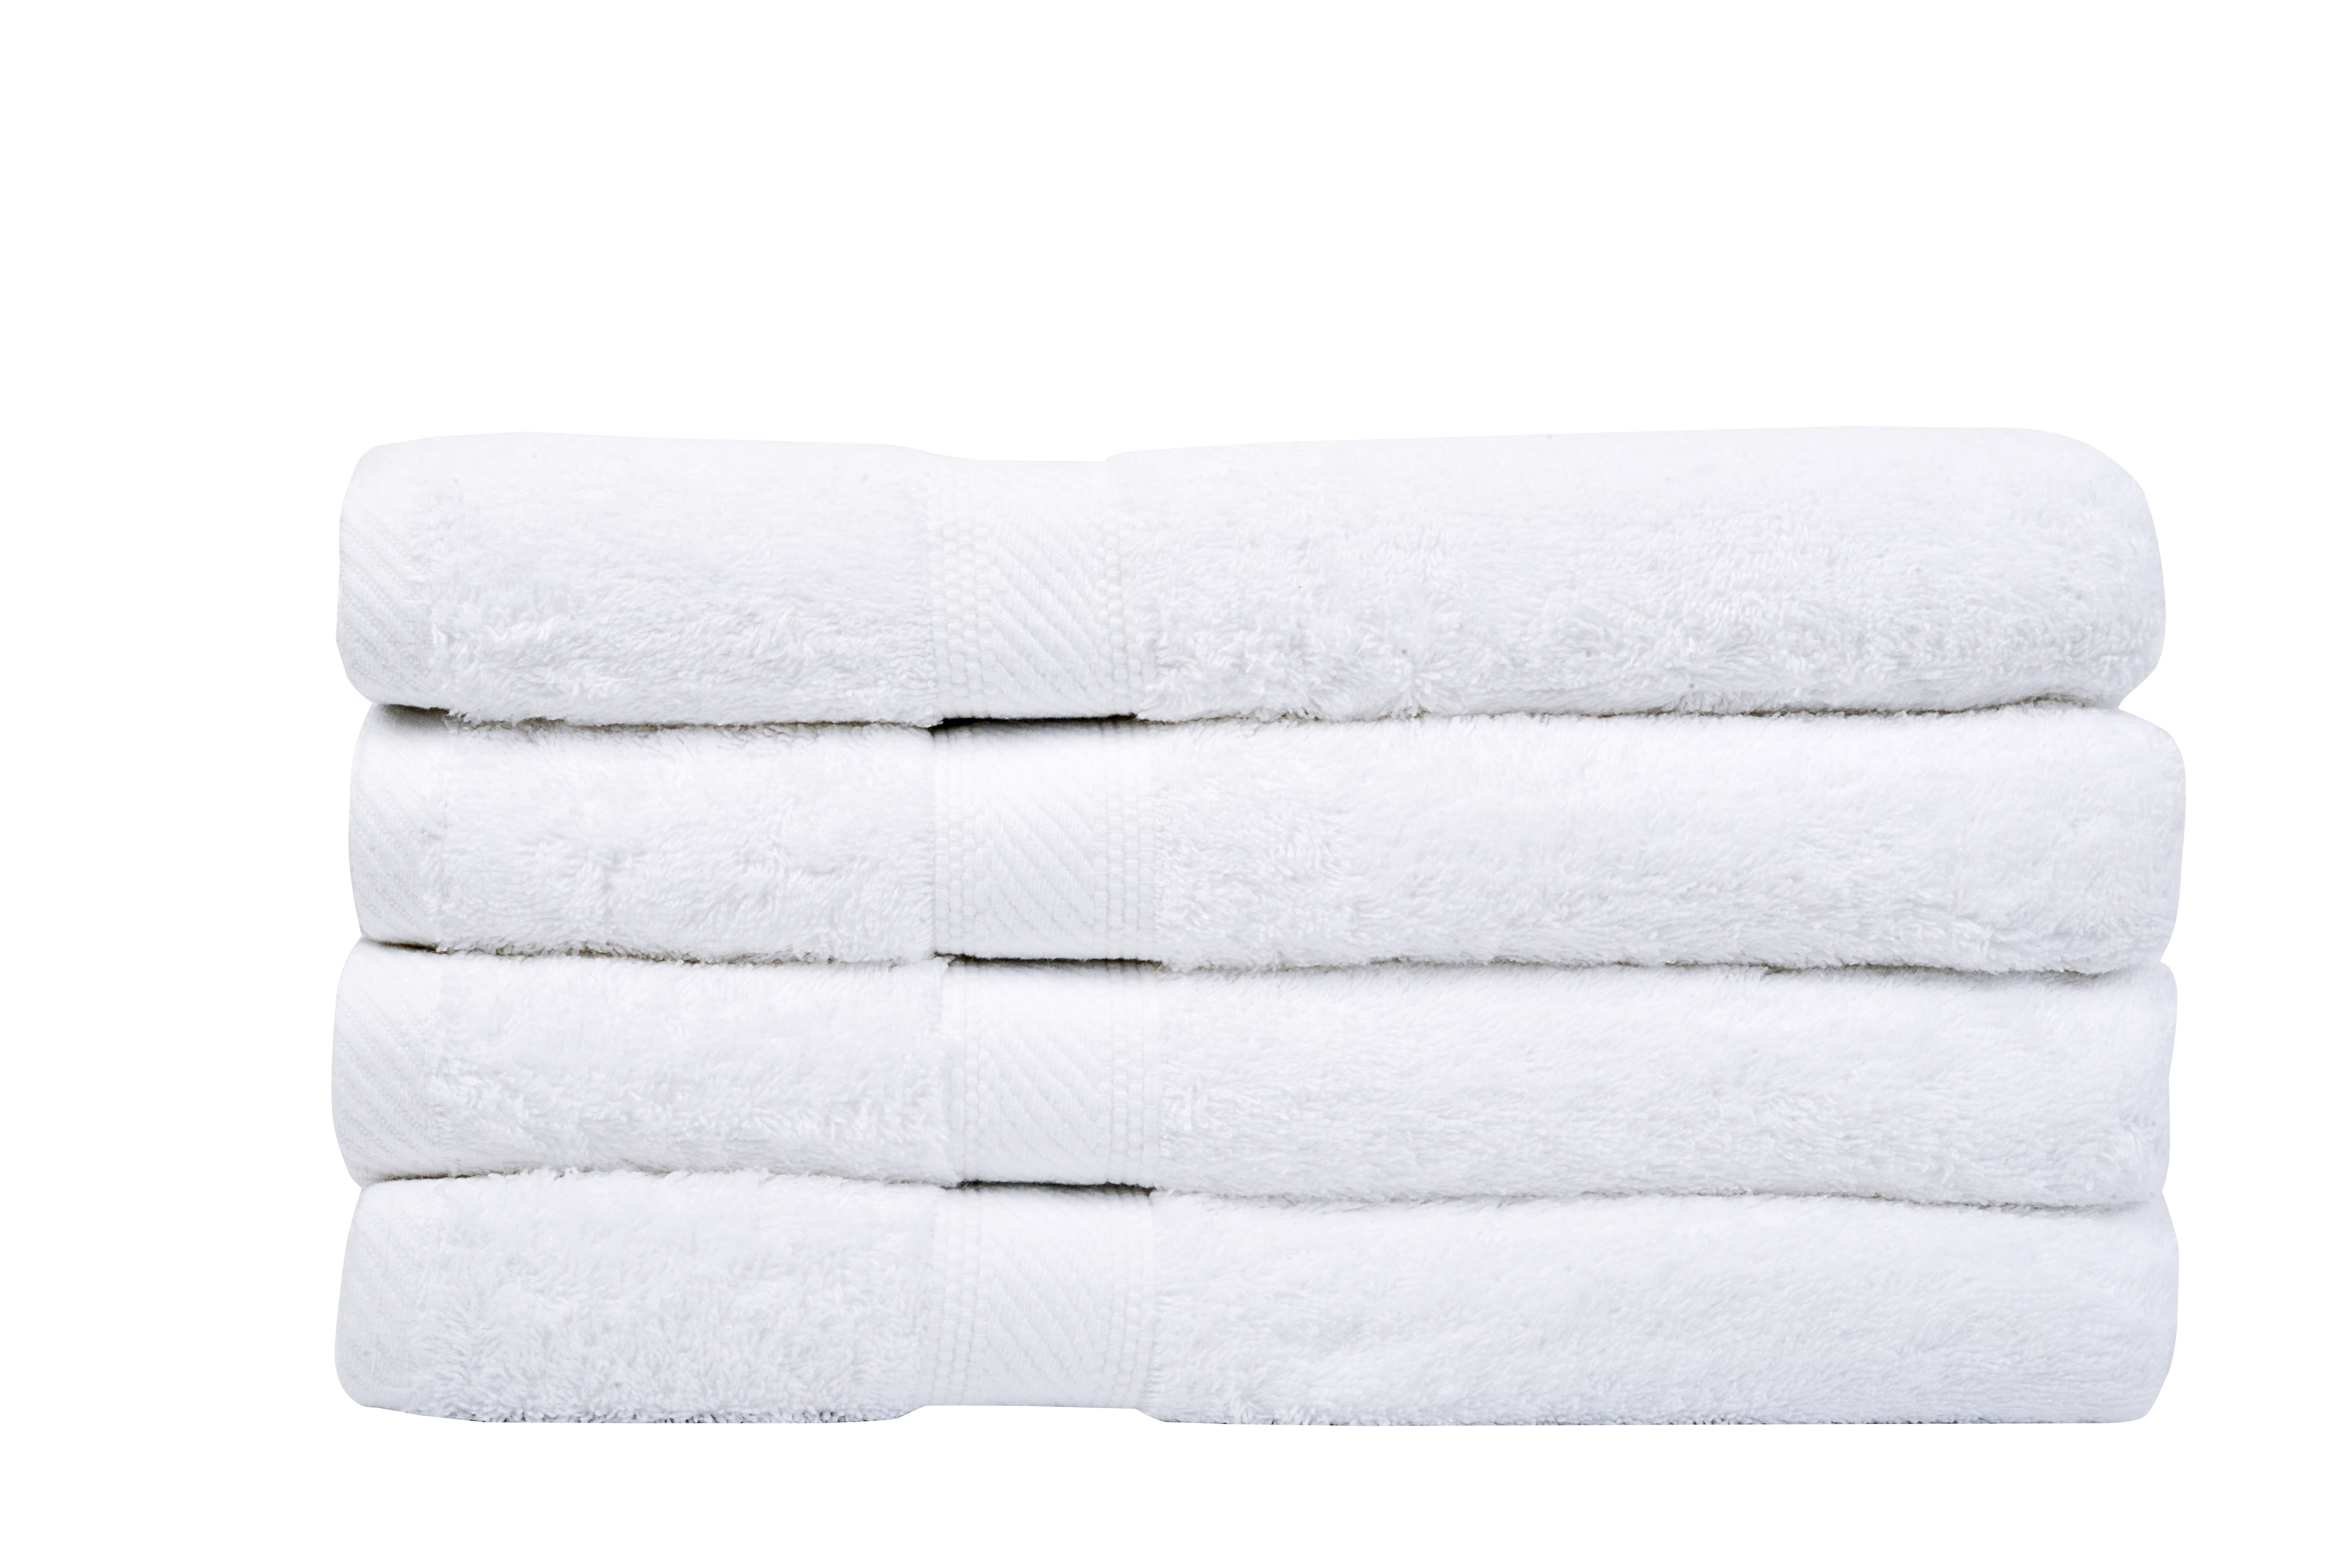 Details about   Mainstays Bath Towel 30 In x 54 In 100% Cotton White 